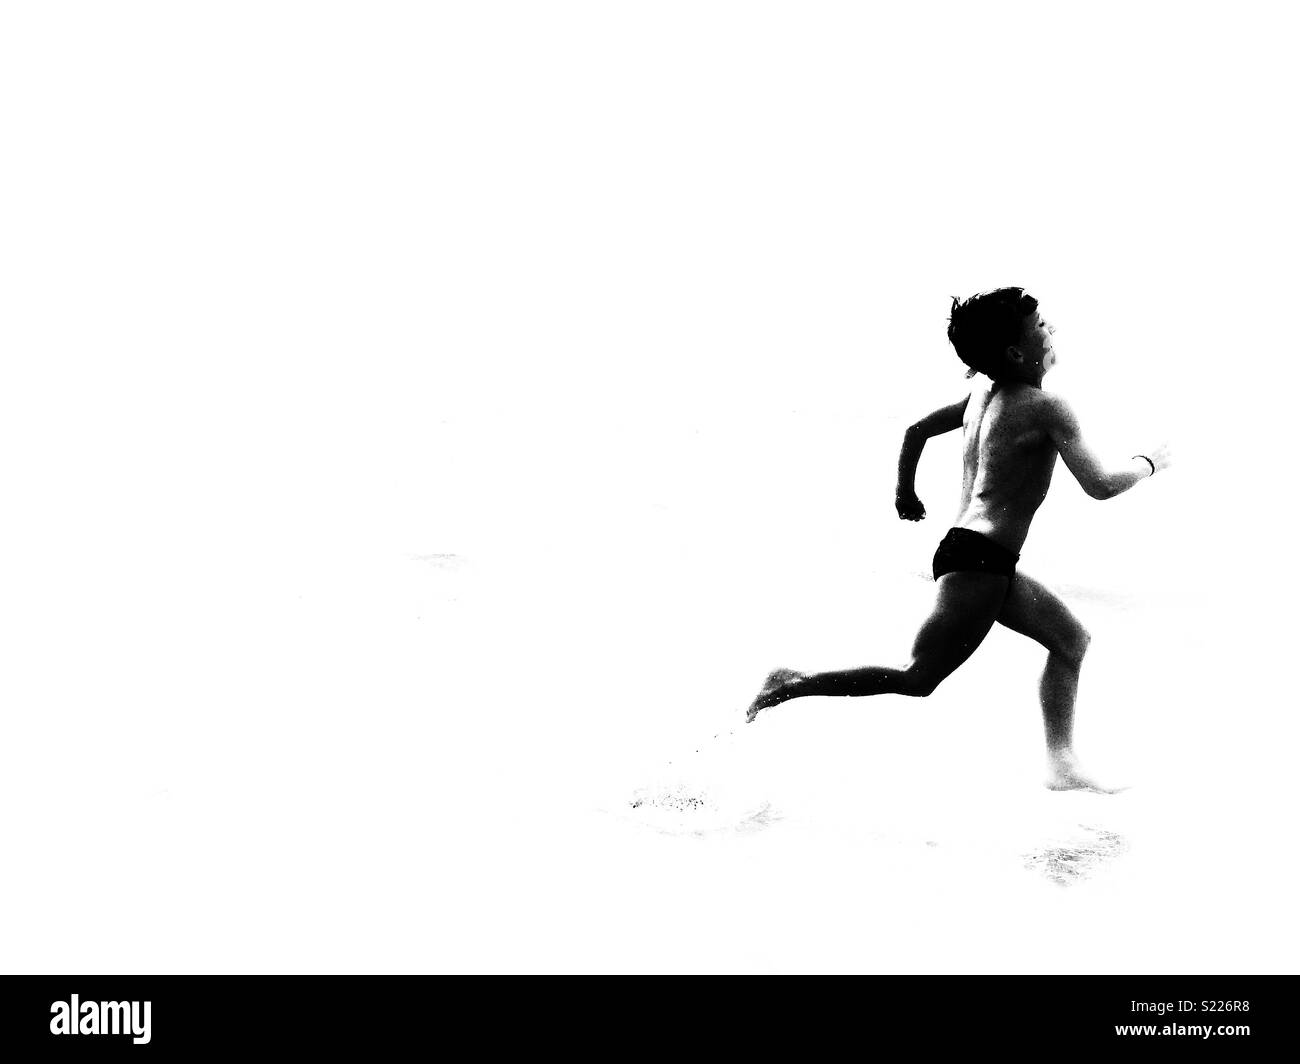 Boy running on the beach. Runner silhouetted on black and white Stock Photo